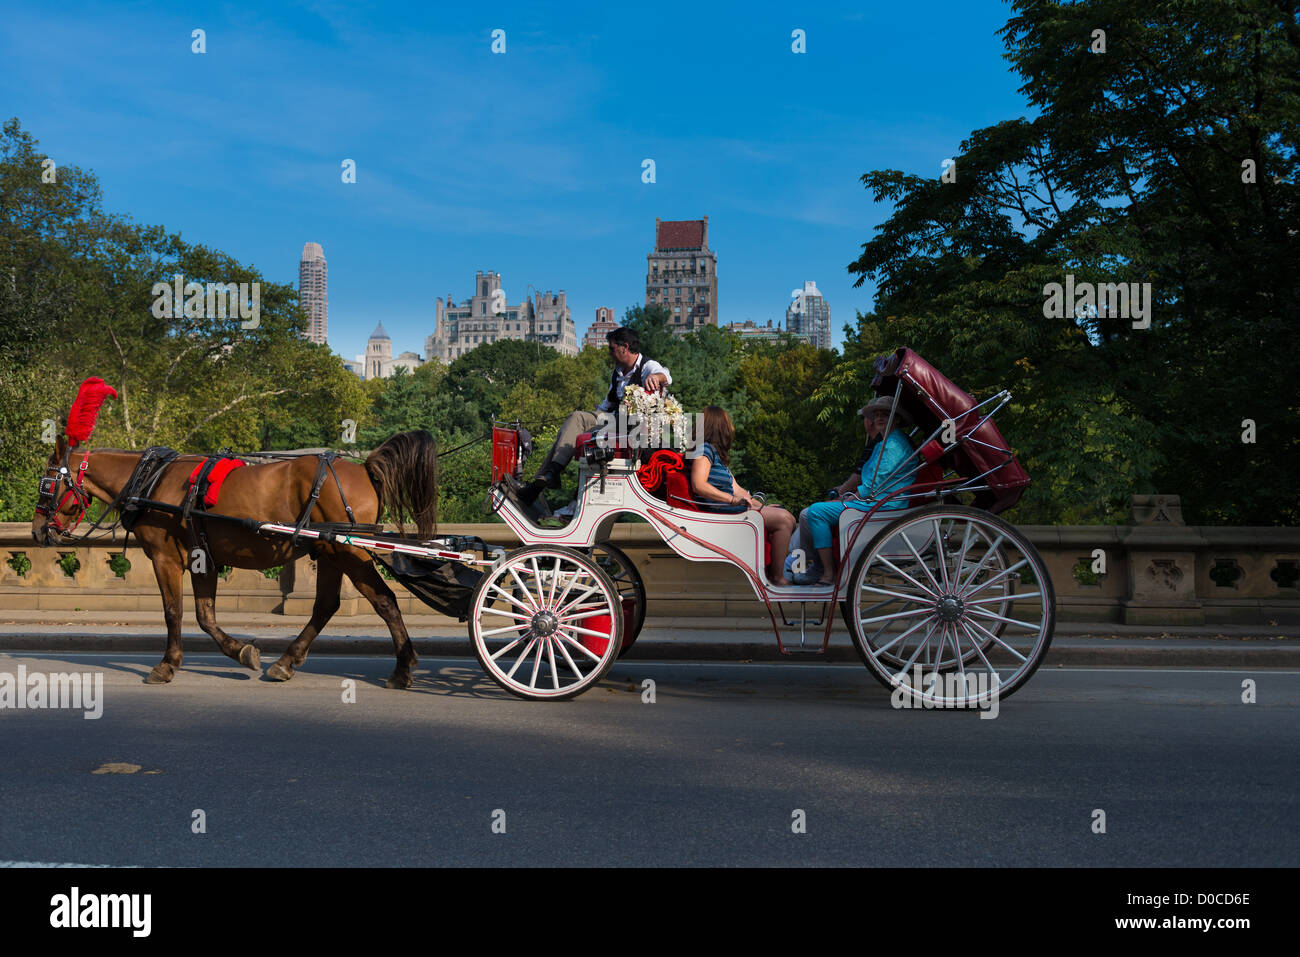 People in horse carriage tour in Central park, New York Stock Photo